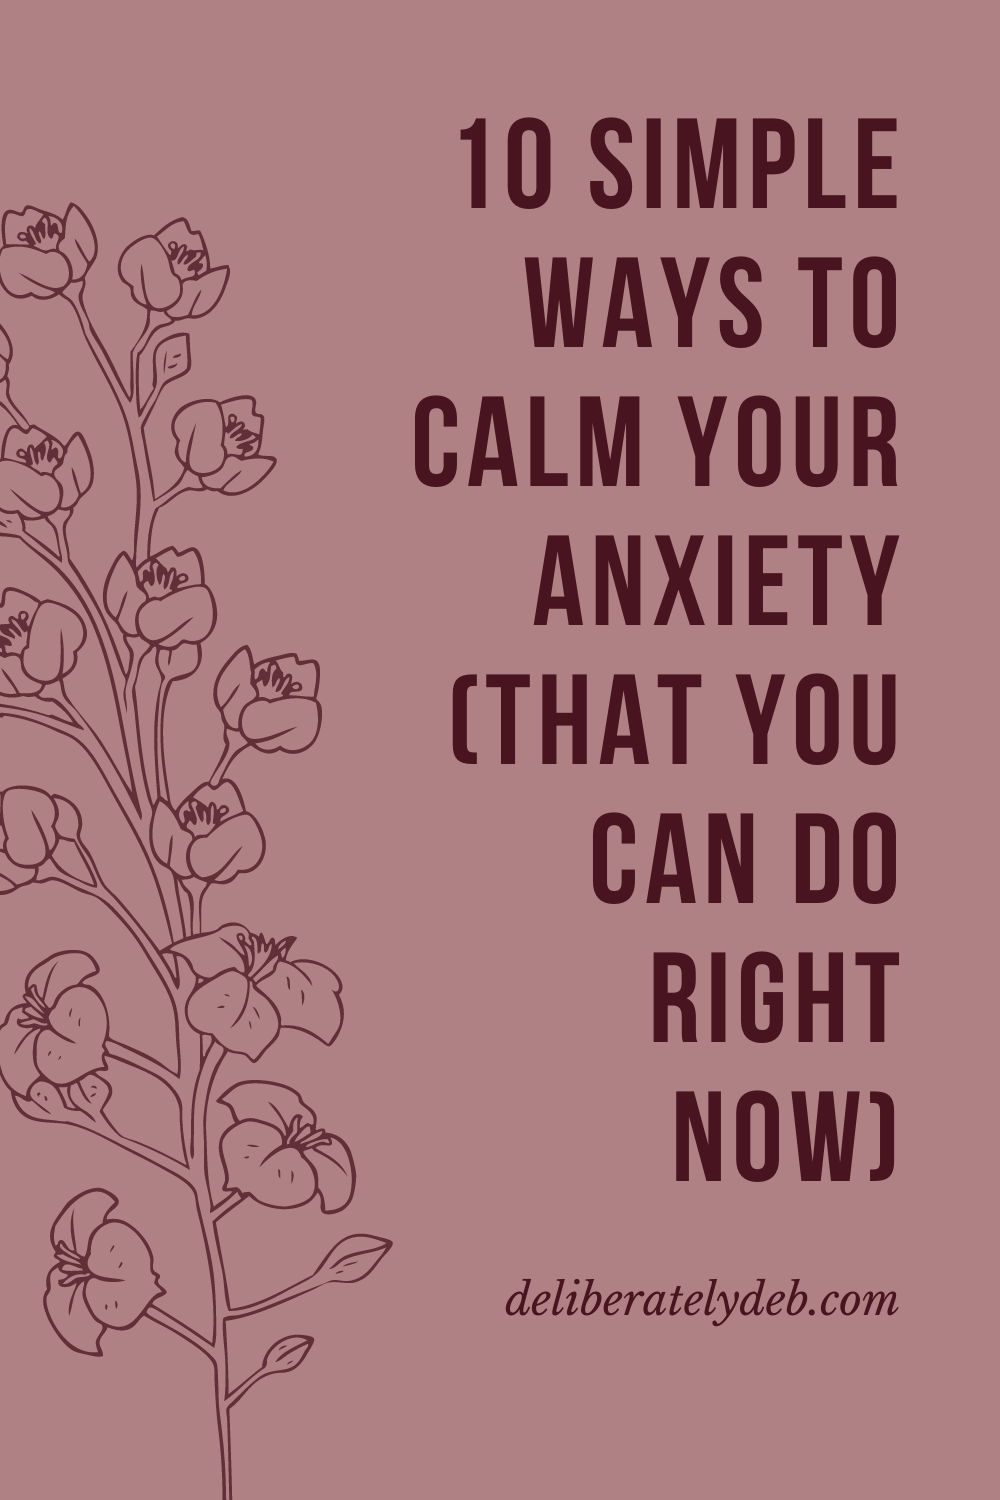 10 Simple Ways to Calm Your Anxiety (That You Can Do Right ...